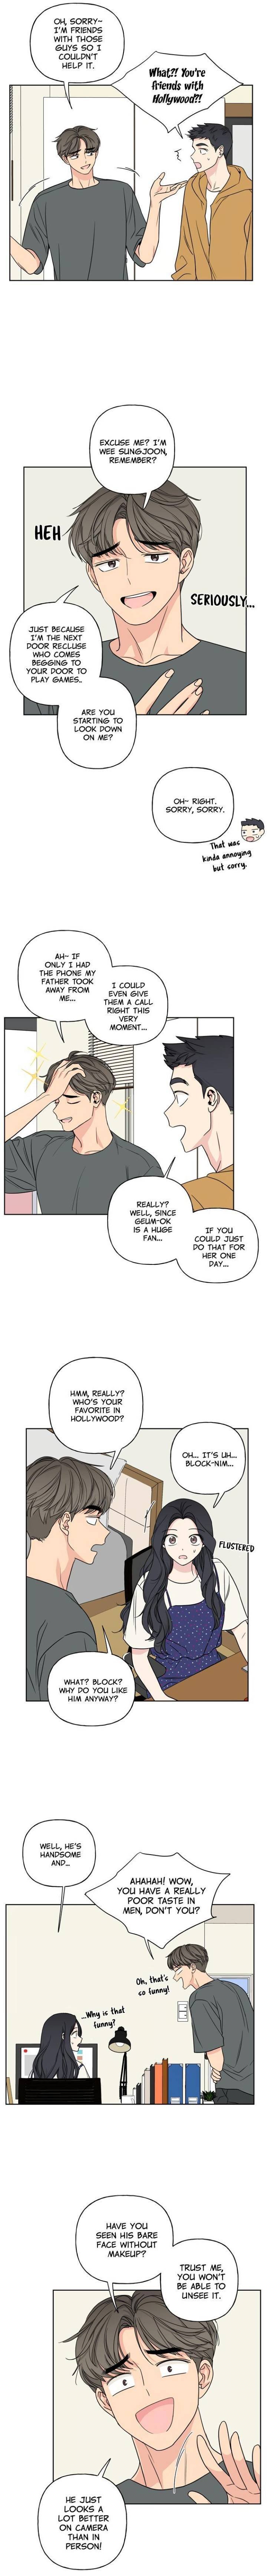 mother-im-sorry-chap-20-4